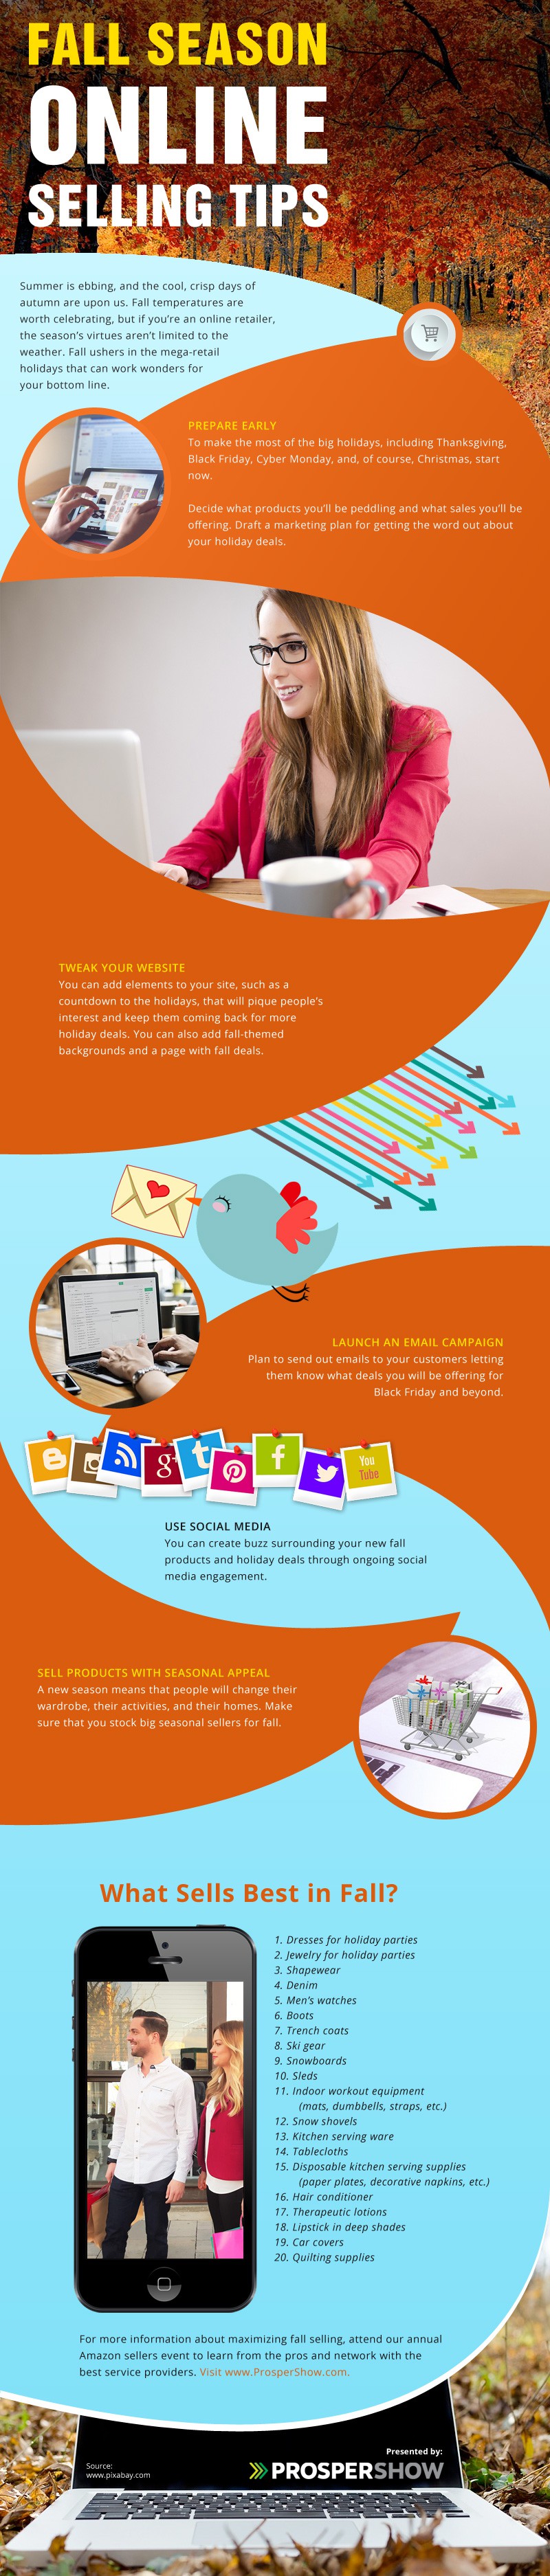 Fall-Season-Online-Selling-Tips Infographic